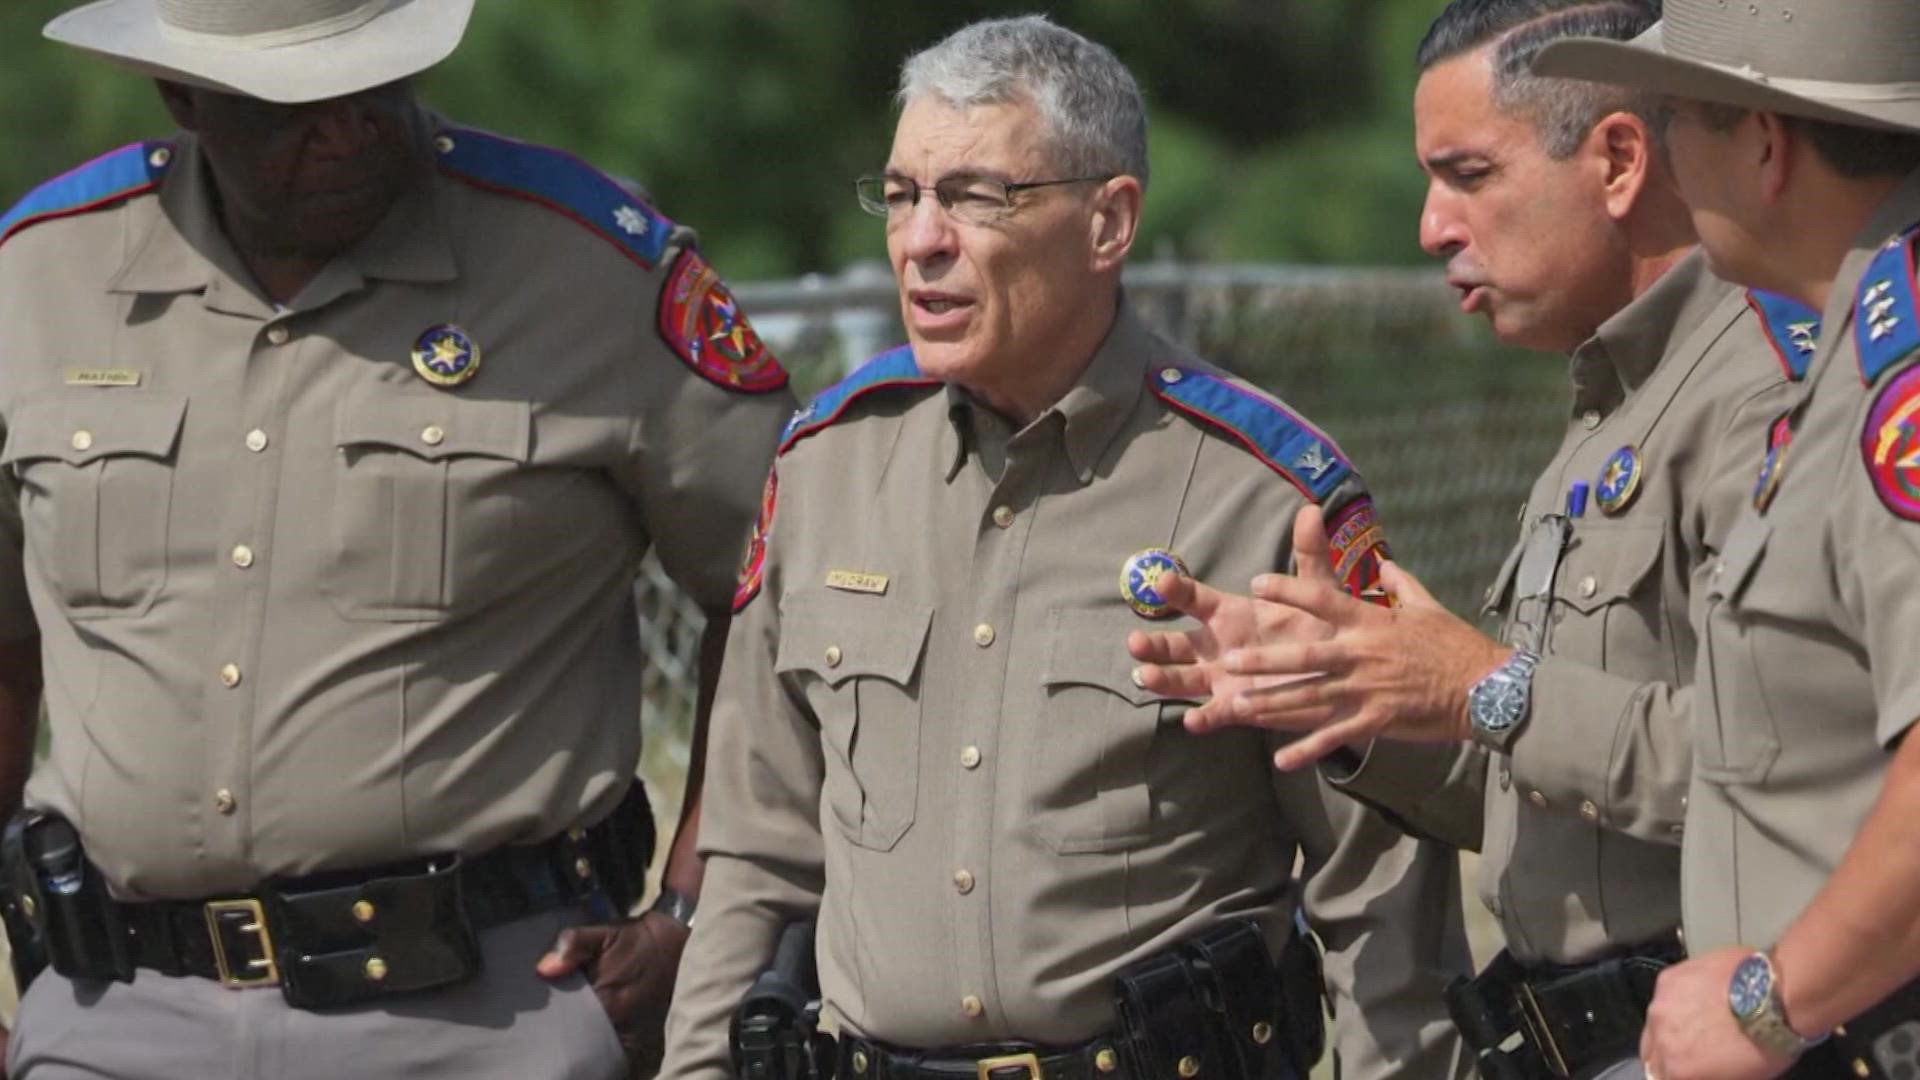 Some the victims' families confronted Texas DPS director Steve McCraw and demanded his resignation, accusing him of lying and not being transparent.